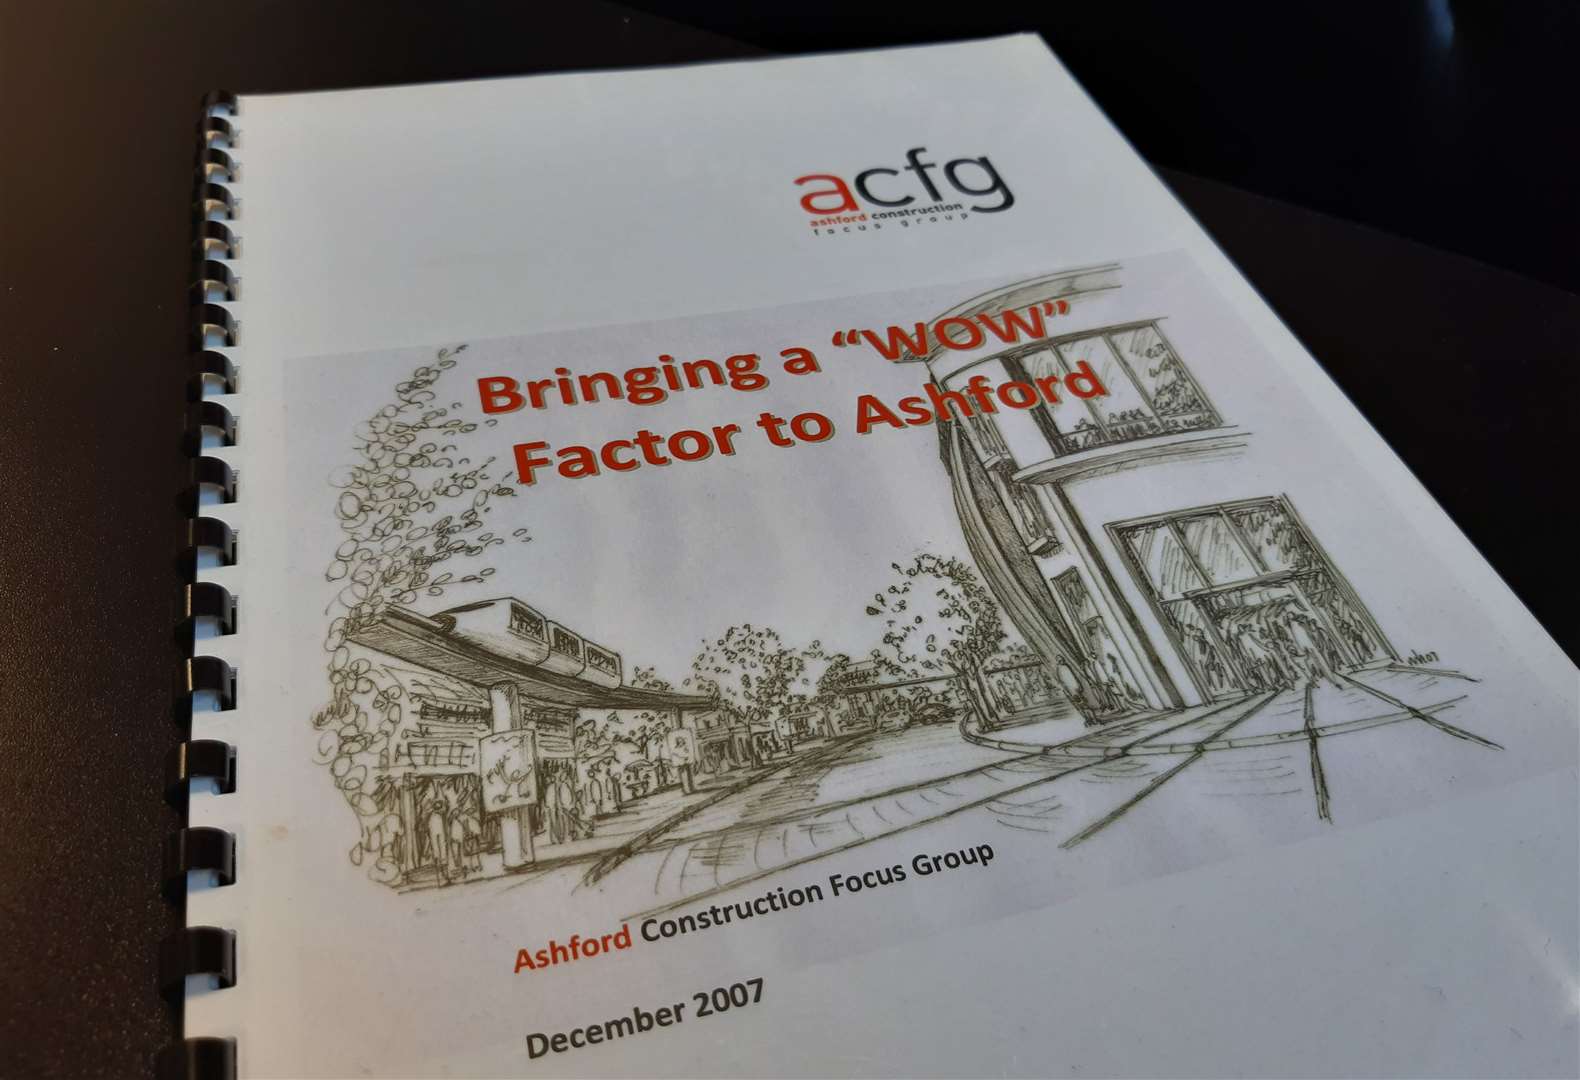 The Ashford Construction Focus Group produced this 14-page document in 2007